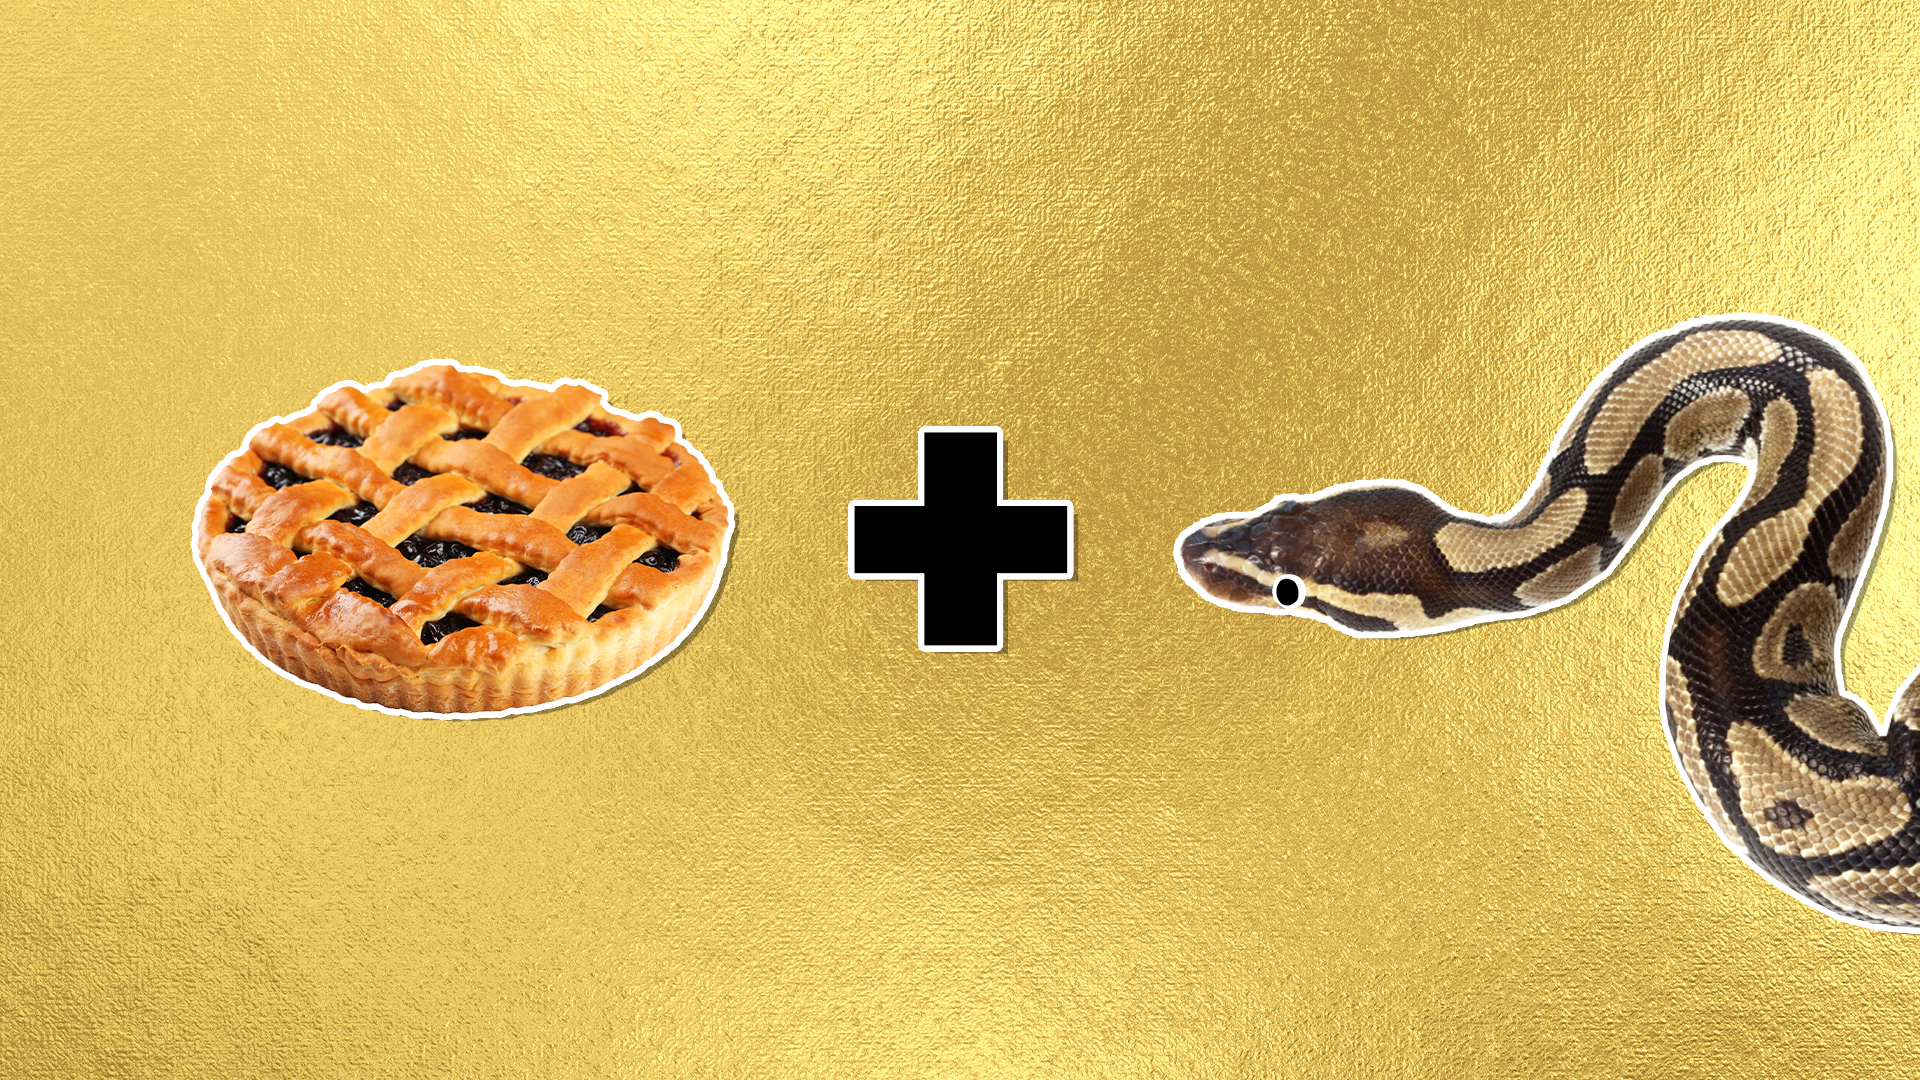 A pie and a snake